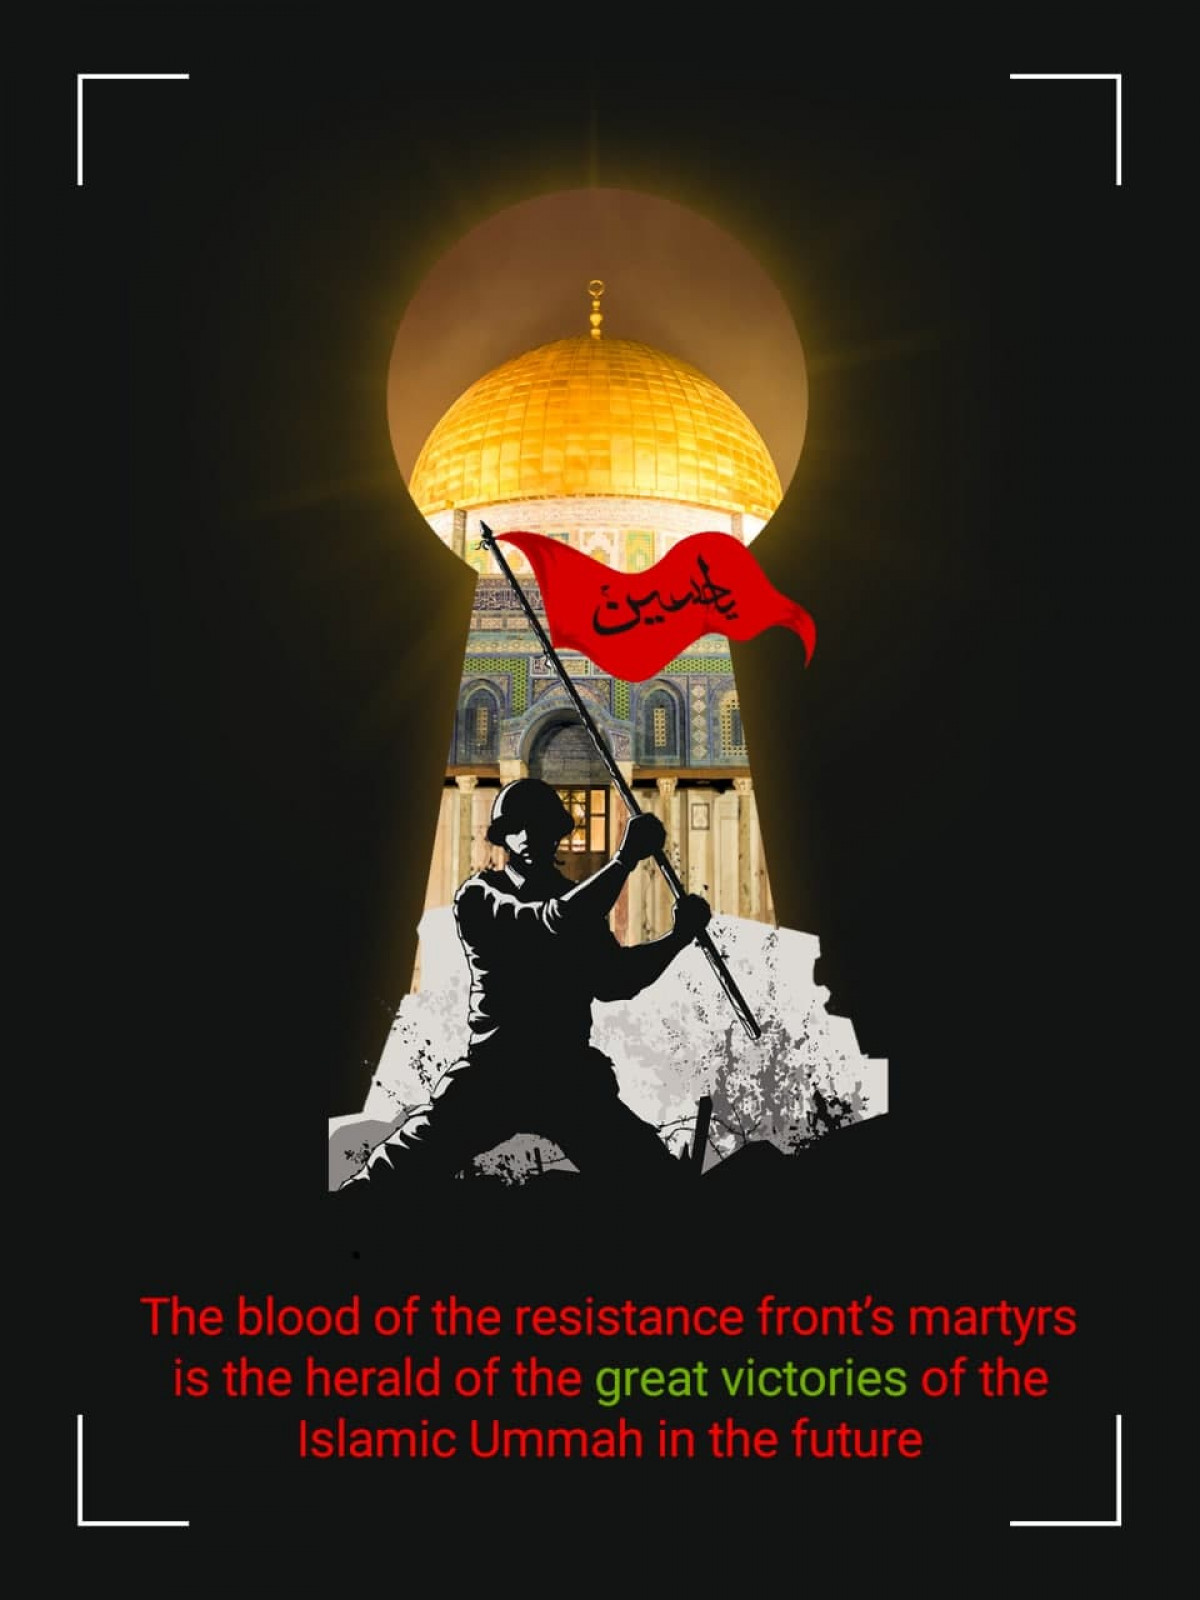 The blood of the resistance front's martyrs